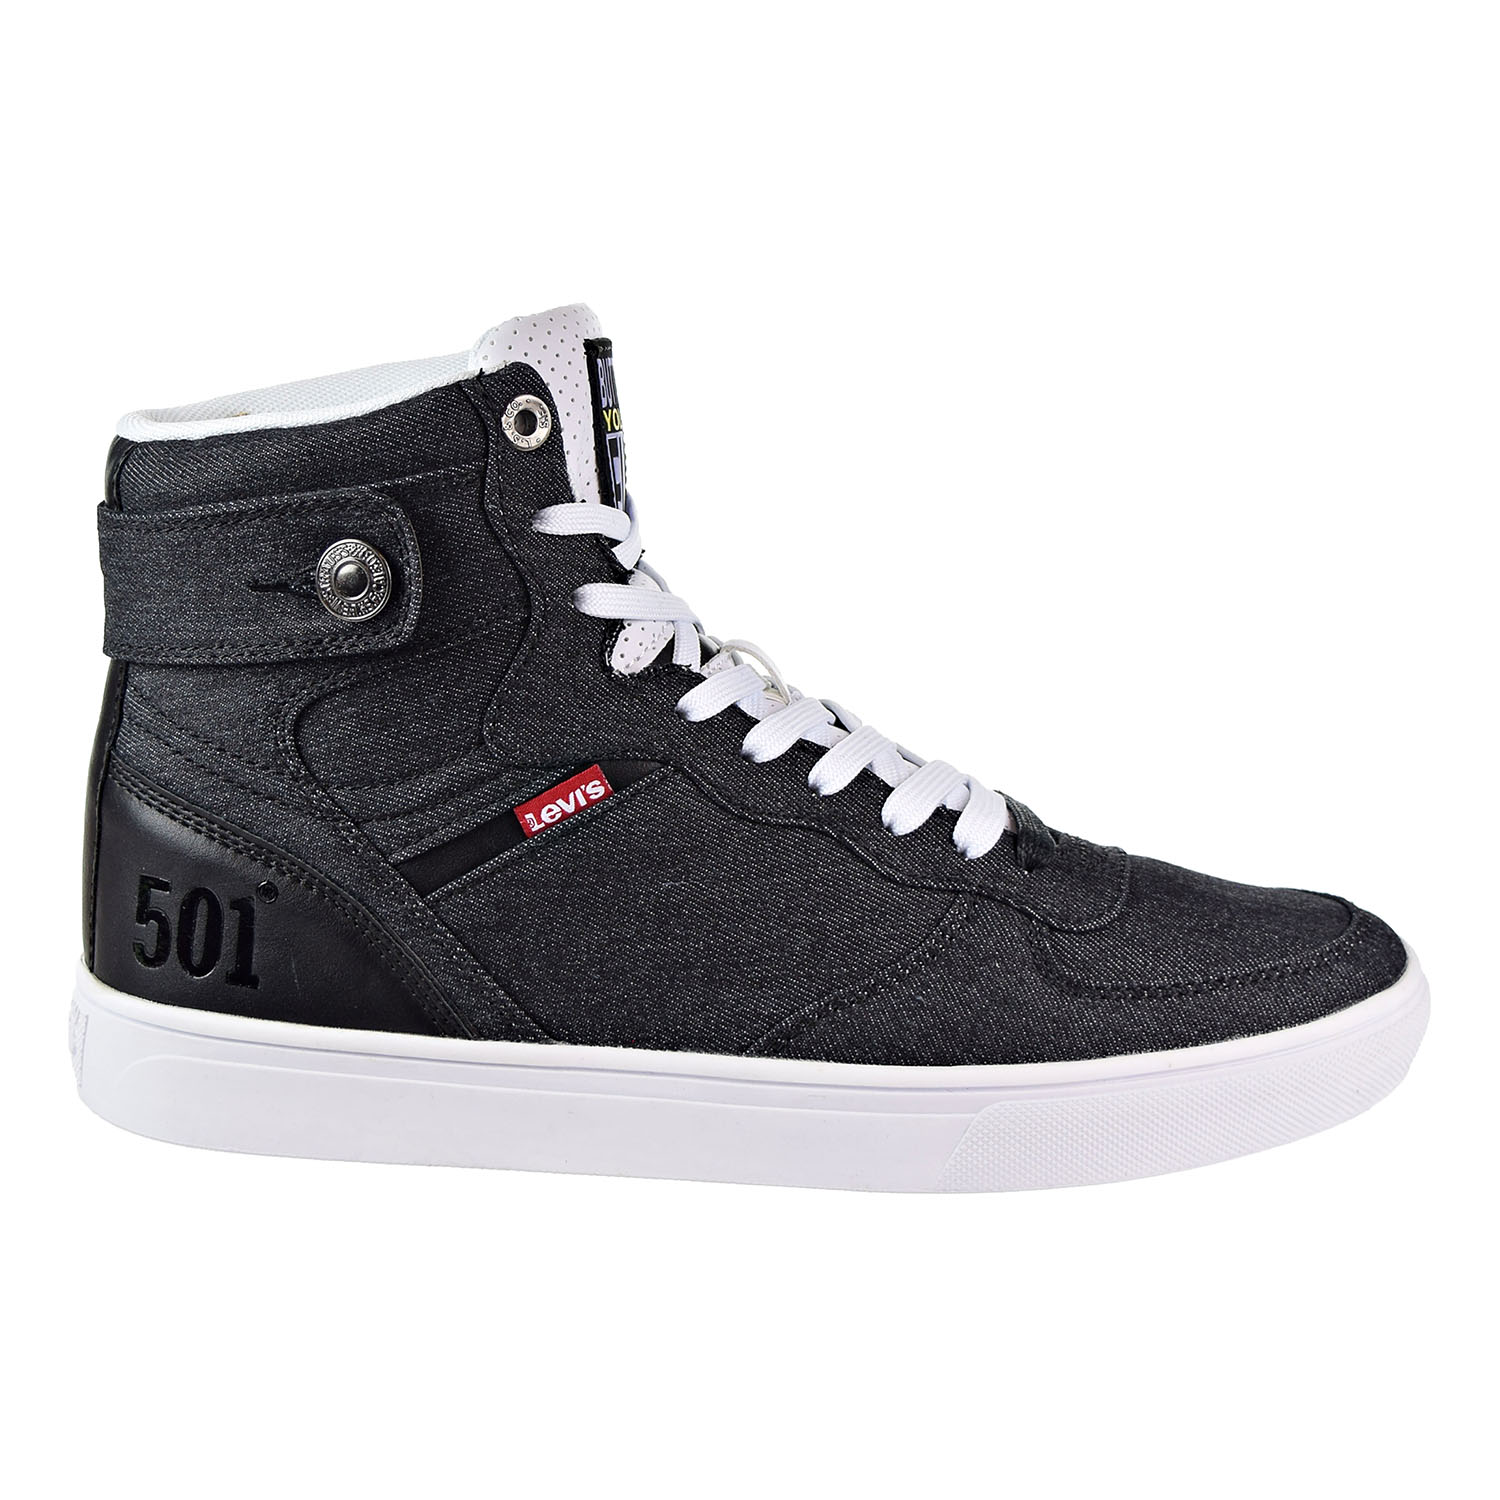 levi's shoes black and white